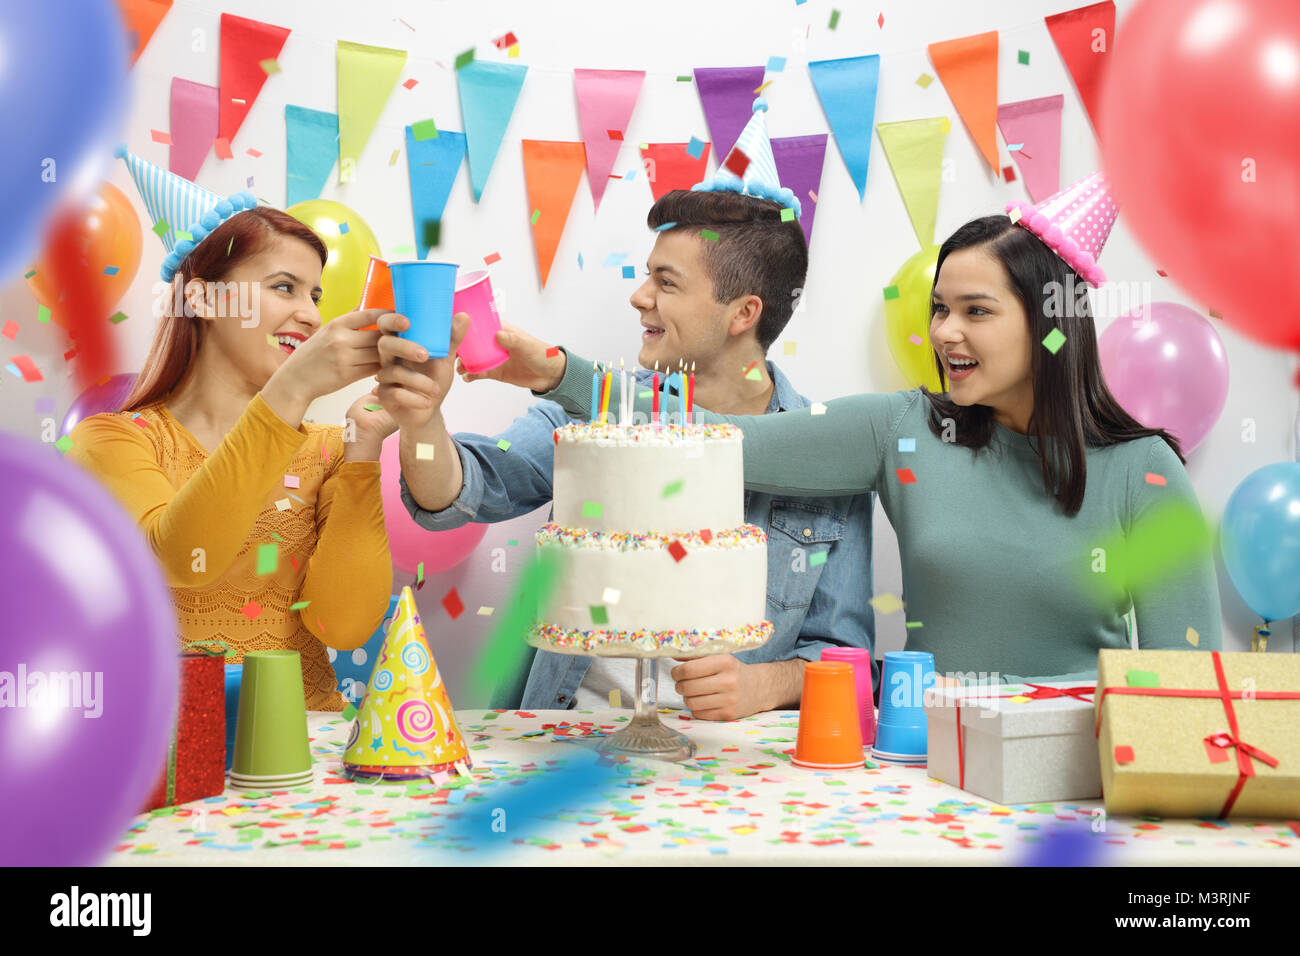 Cheerful teenagers celebrating a birthday and making a toast Stock Photo